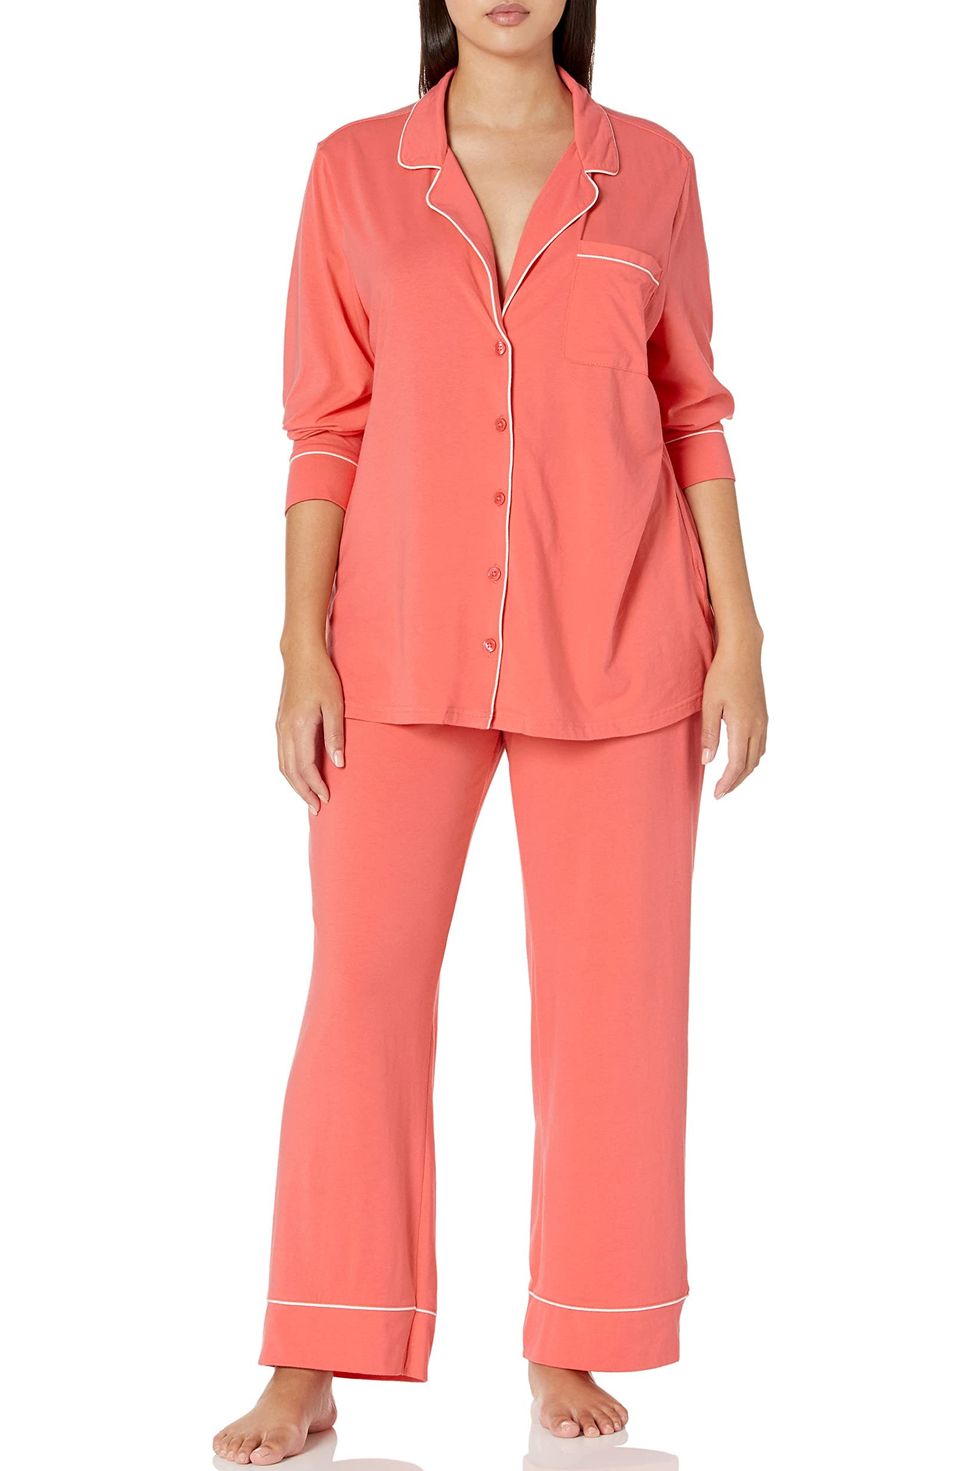 This Women's Pajama Set is My New Fave Thing to Sleep In! Here's Why 